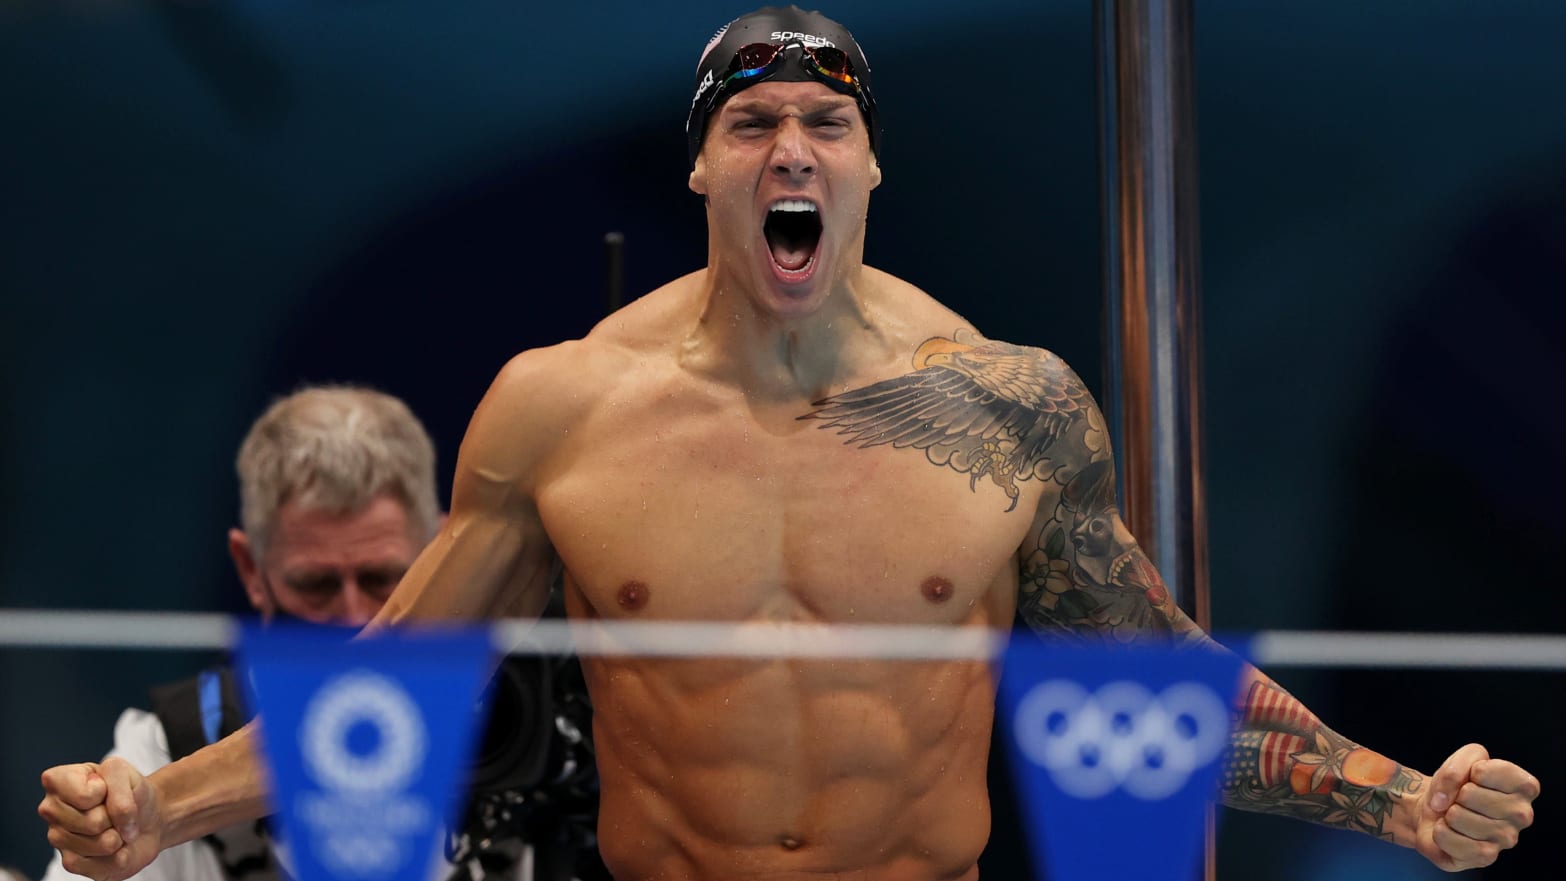 US Swimmer Caeleb Dressel's Olympic Gold MedalWinning Workout Routine